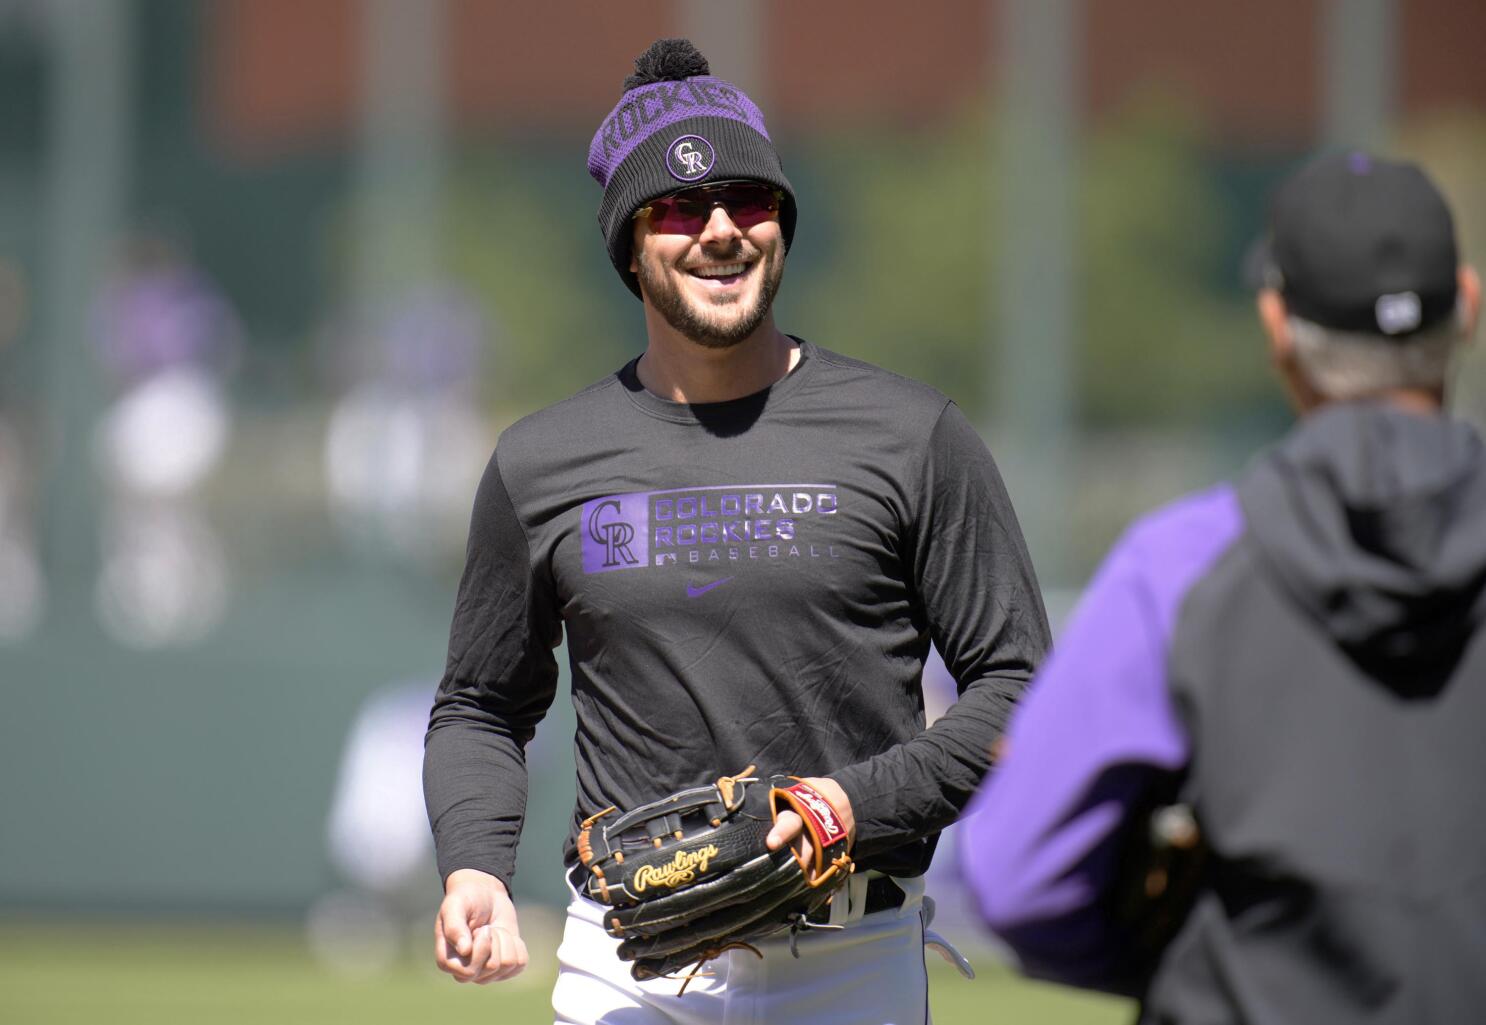 Kris Bryant open to new deal, knows time as Cub could wind down